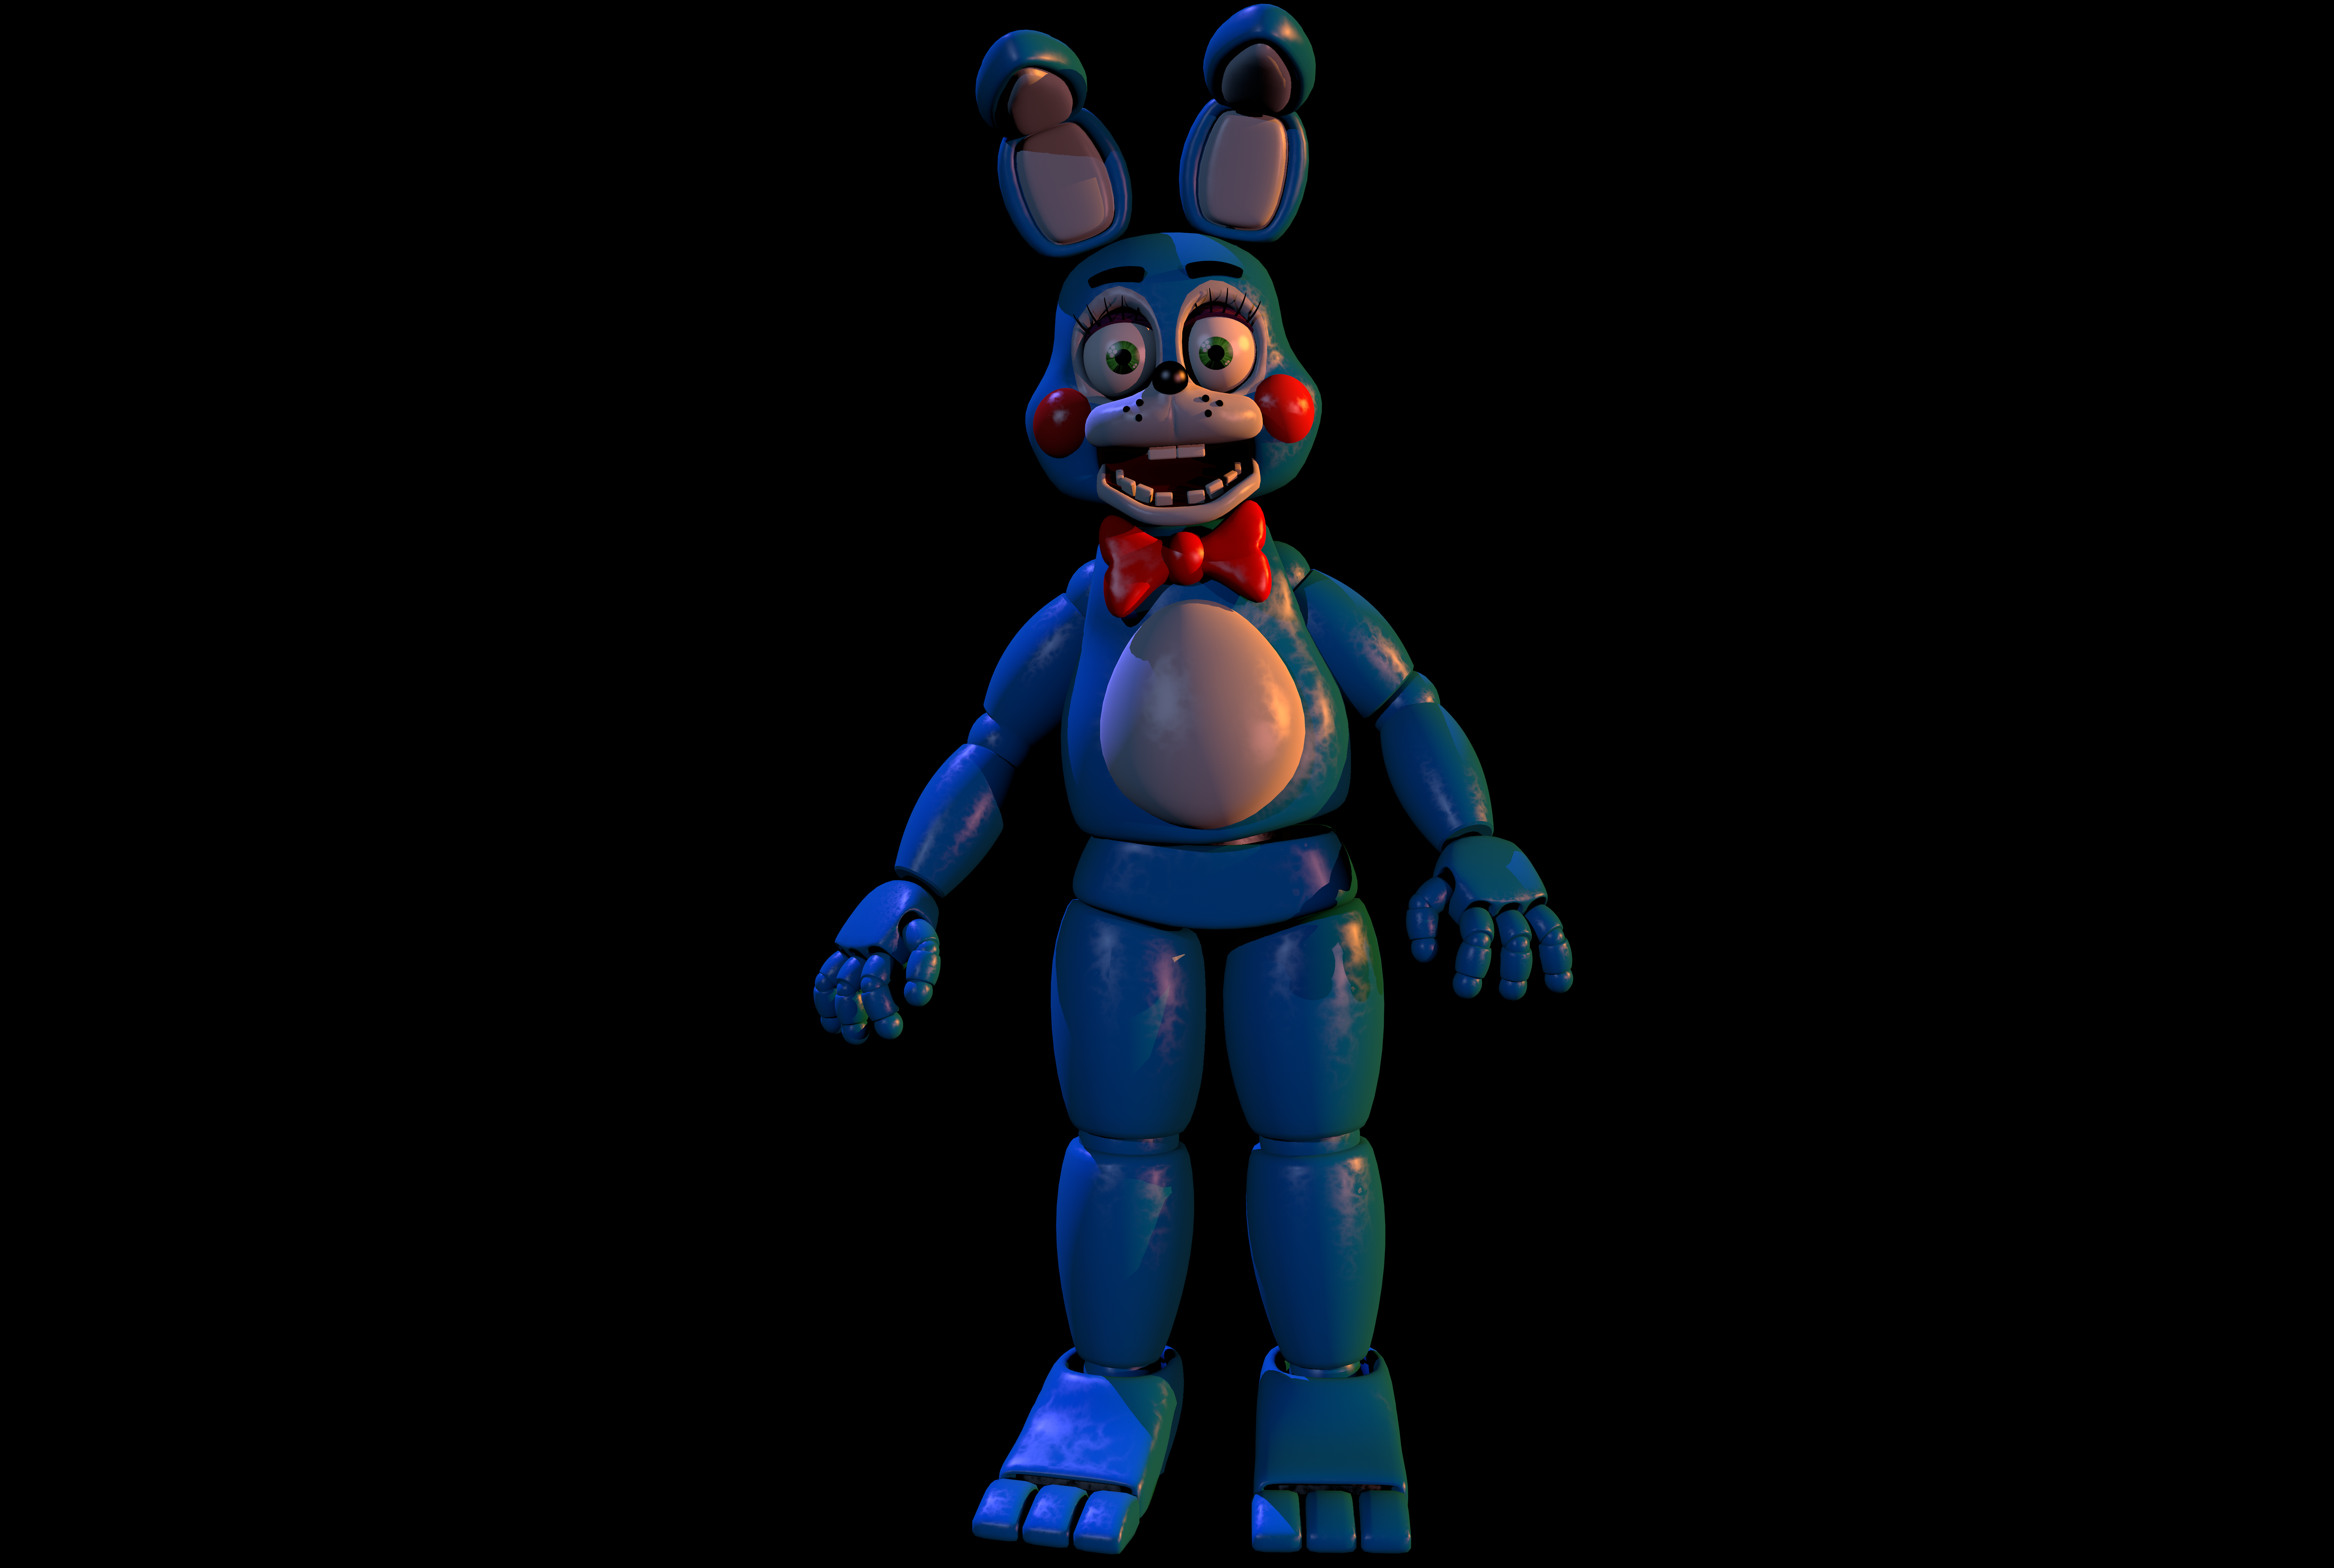 Bonnie from Toy Story in HSK Style by JayReganWright2005 on DeviantArt